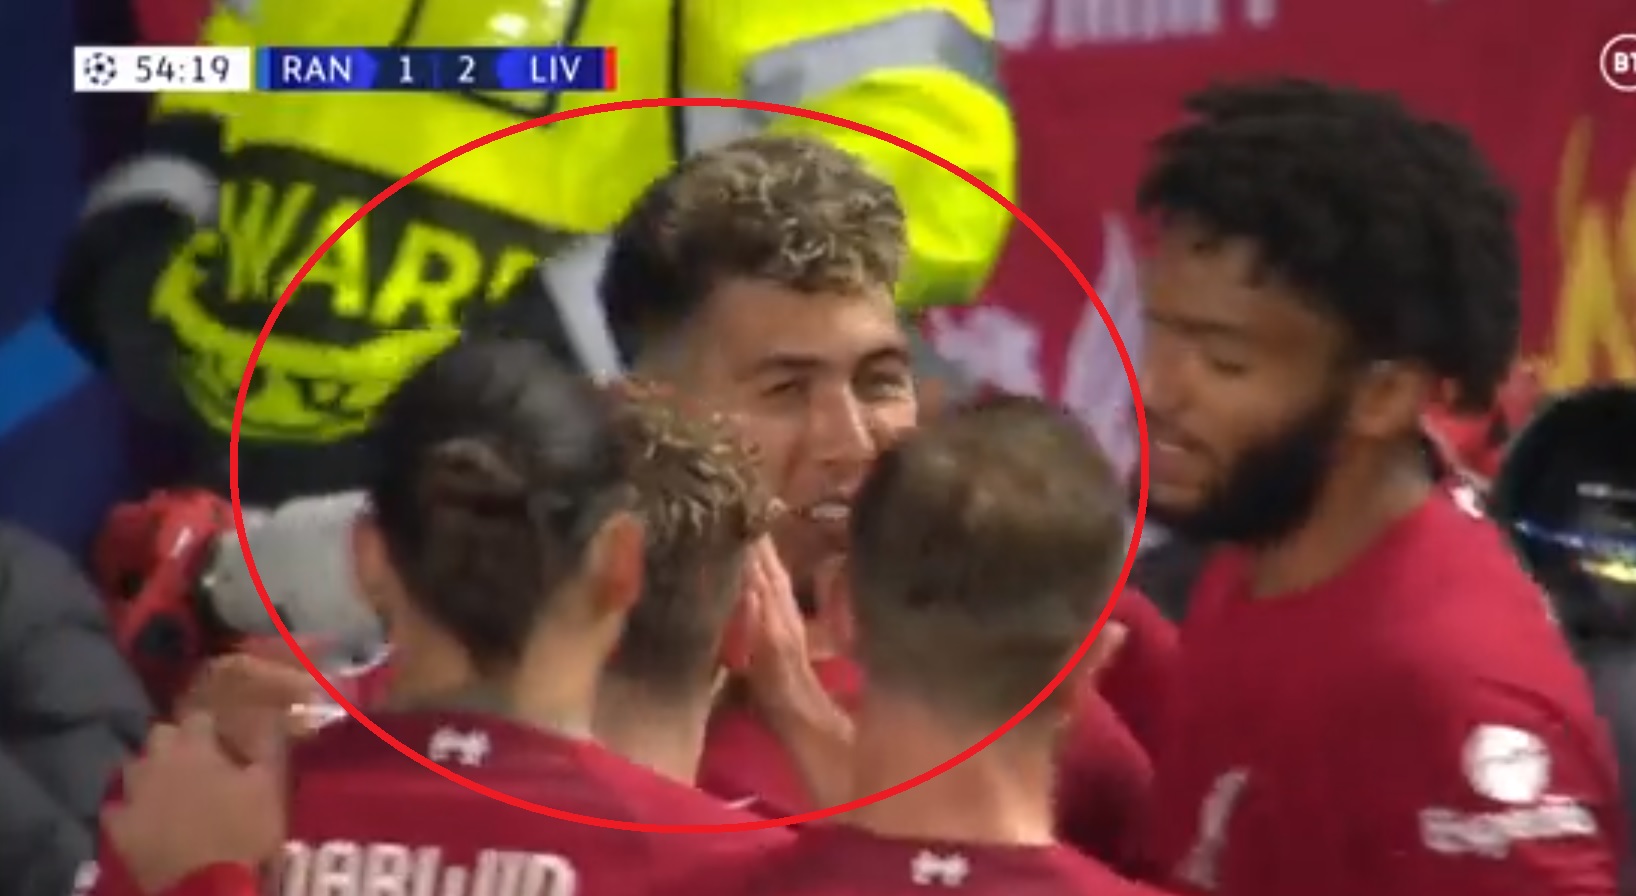 (Video) Wholesome moment between Elliott & Firmino went under the radar after second Liverpool goal